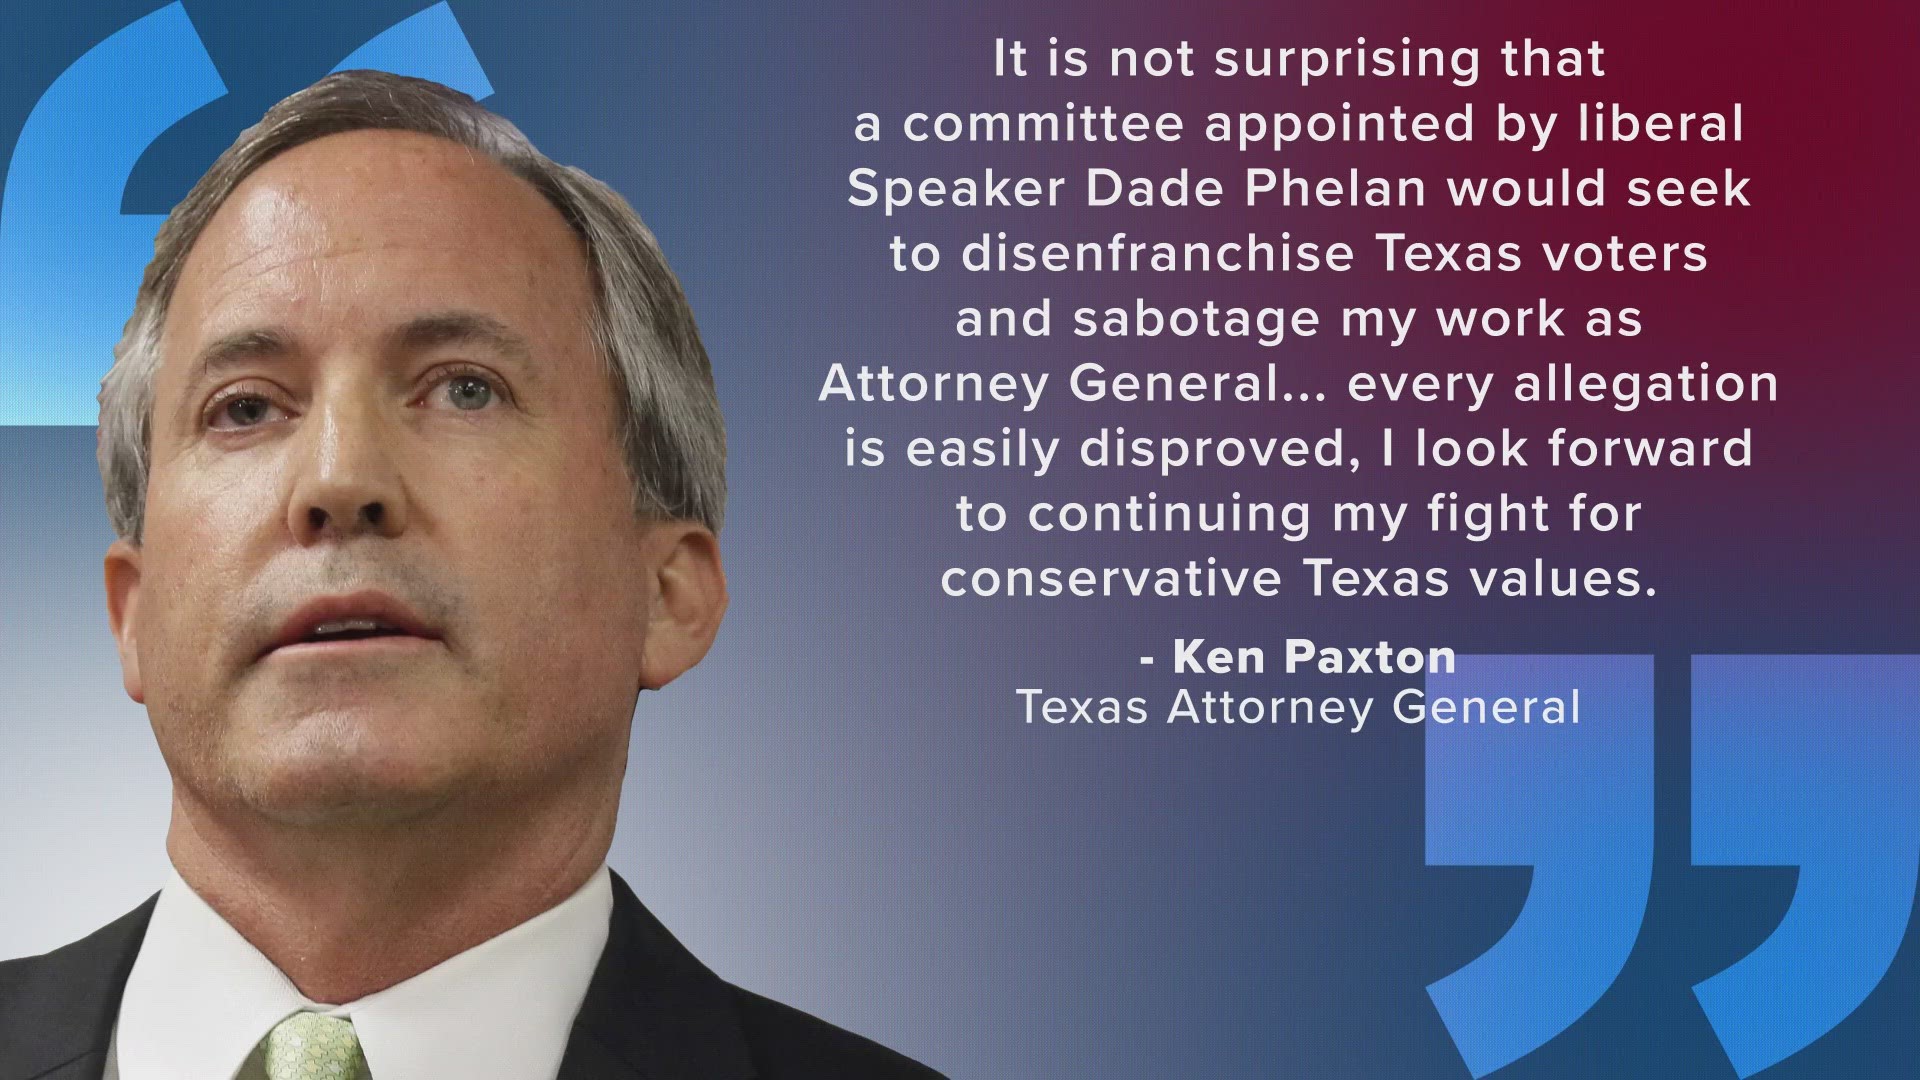 Four investigators testified that they believe Paxton broke numerous state laws, misspent office funds and misused his power to benefit a friend and political donor.